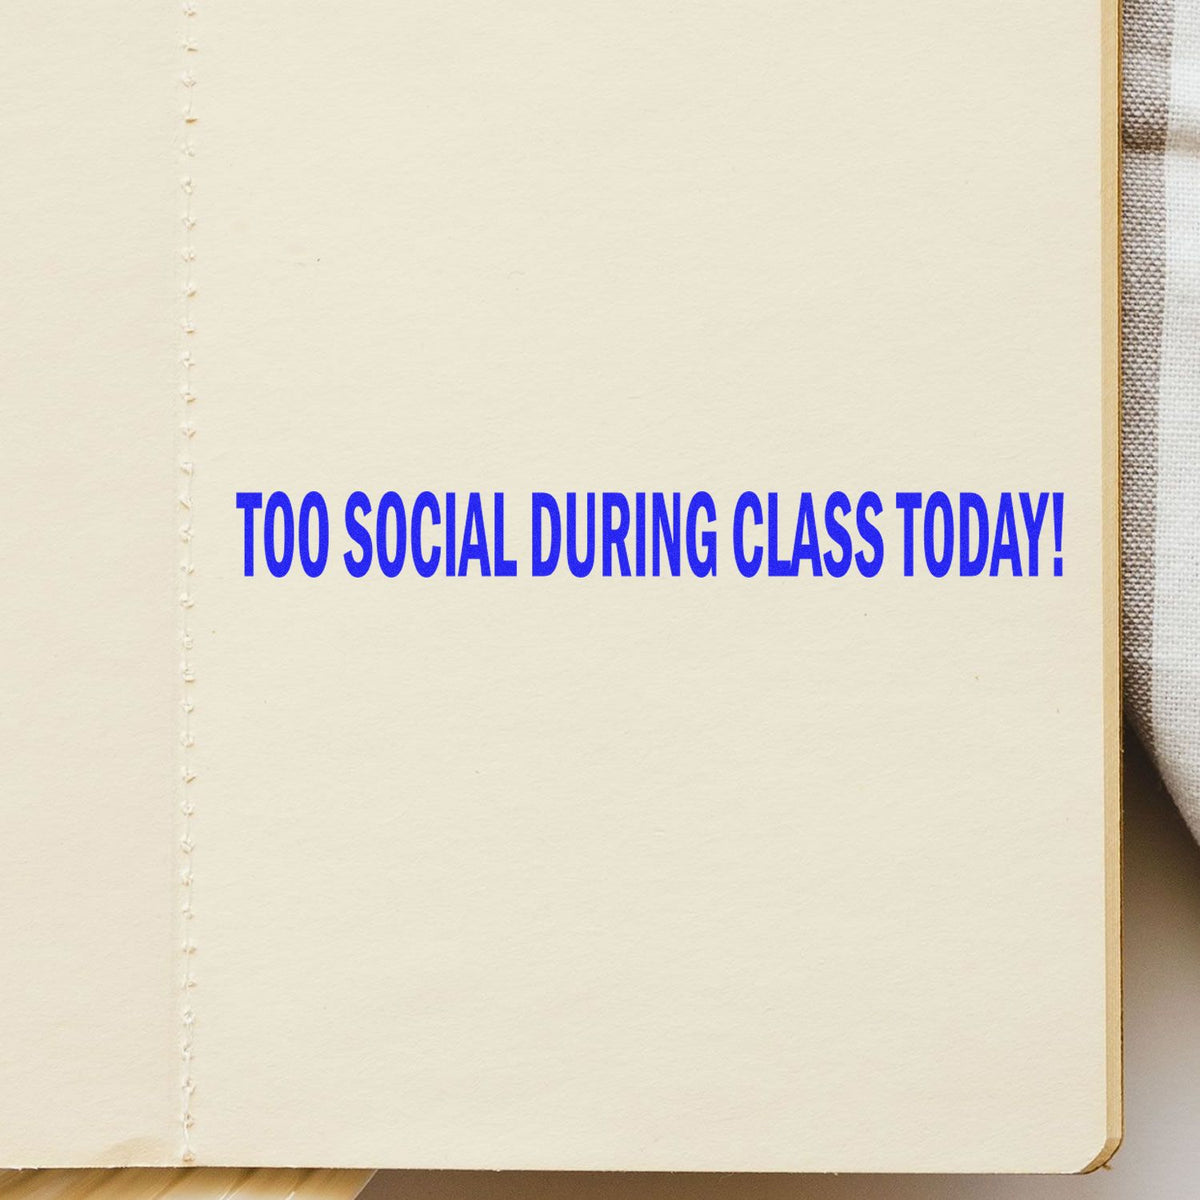 Too Social During Class Today Rubber Stamp In Use Photo